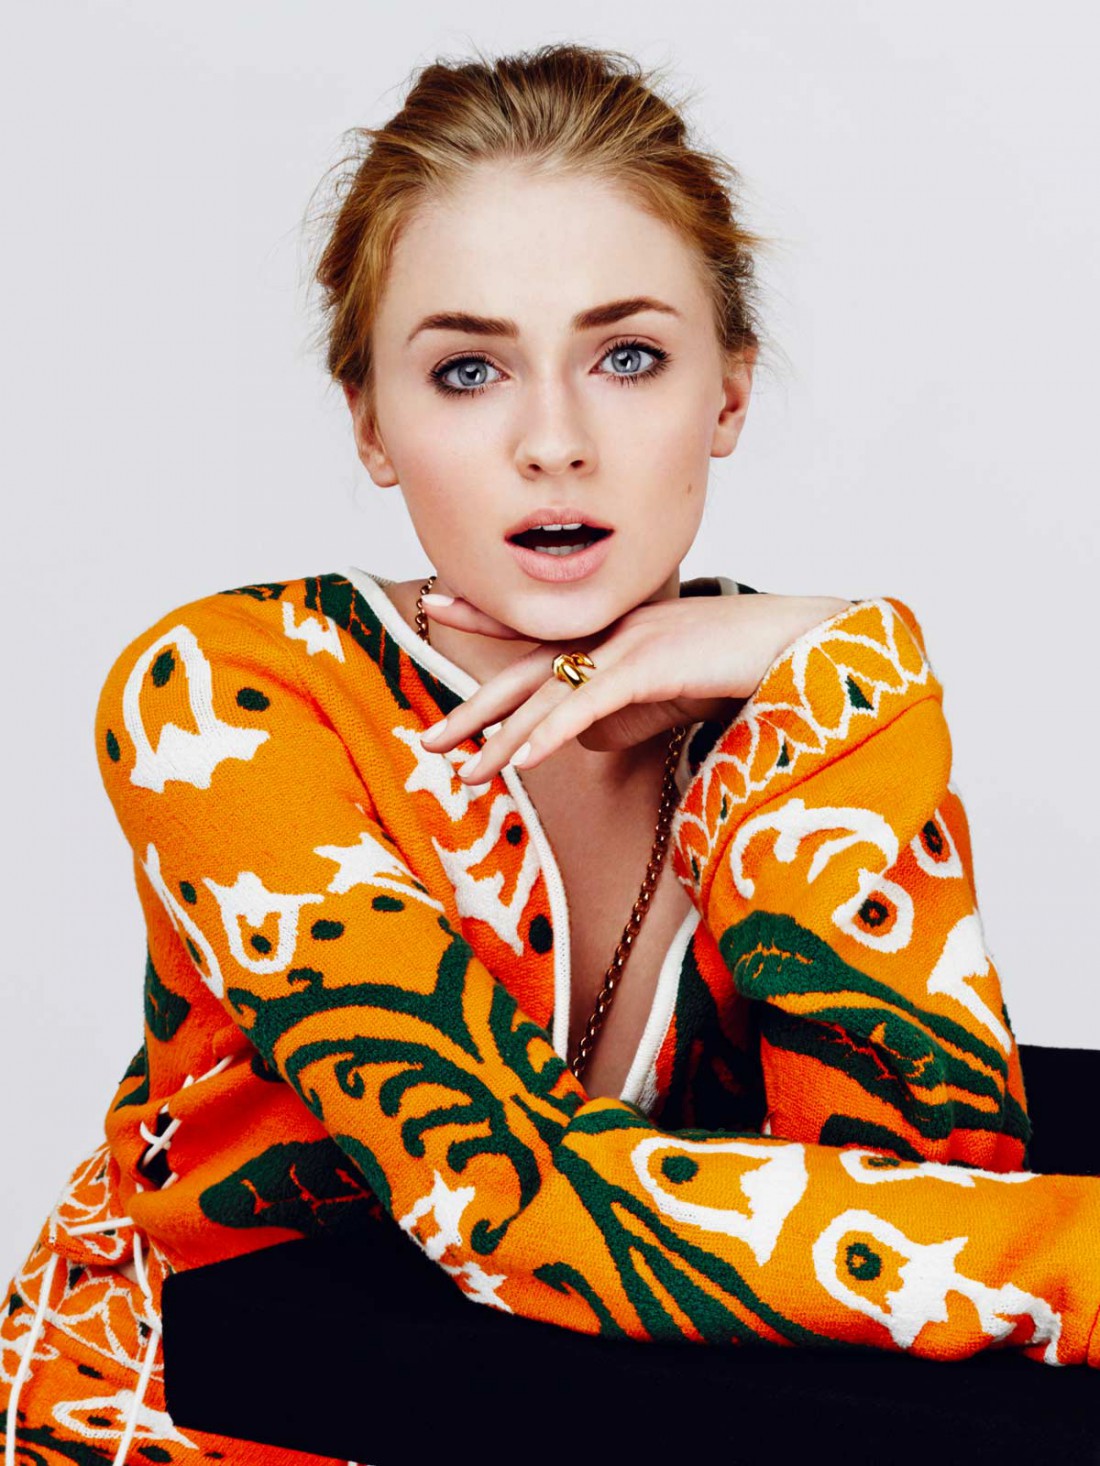 Glamour_Mexico_SophieTurner_Cover_04-110